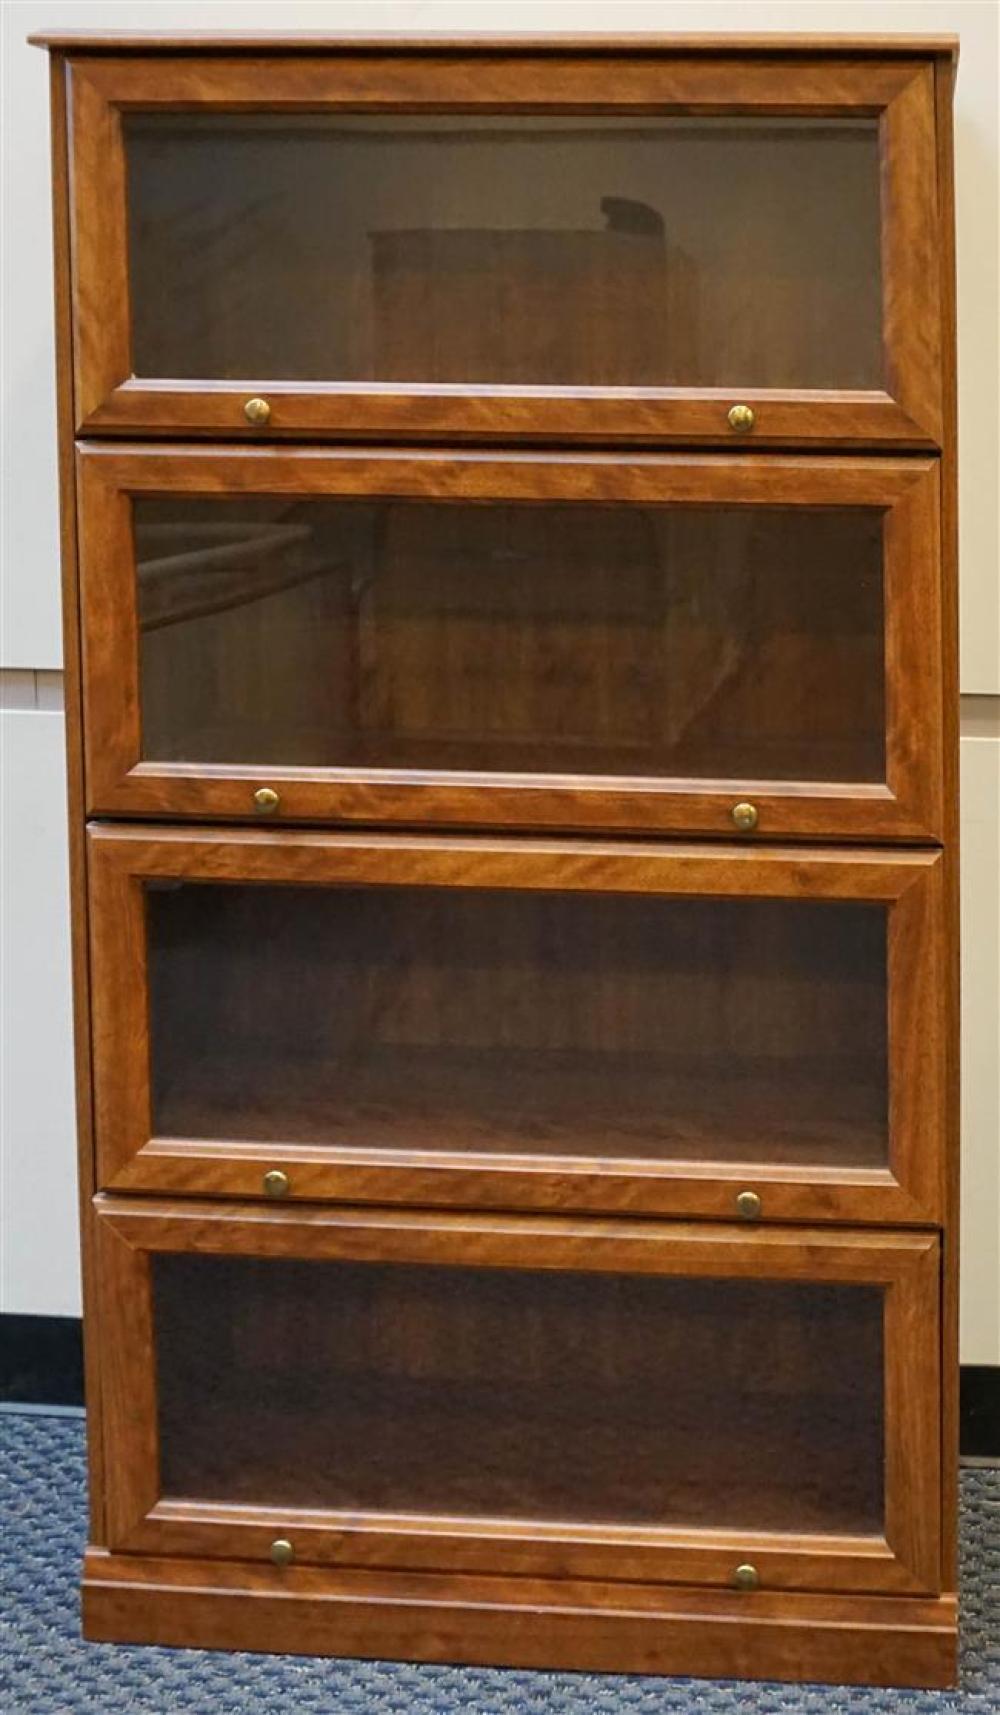 CHERRY FINISH BARRISTER STYLE BOOKCASE,